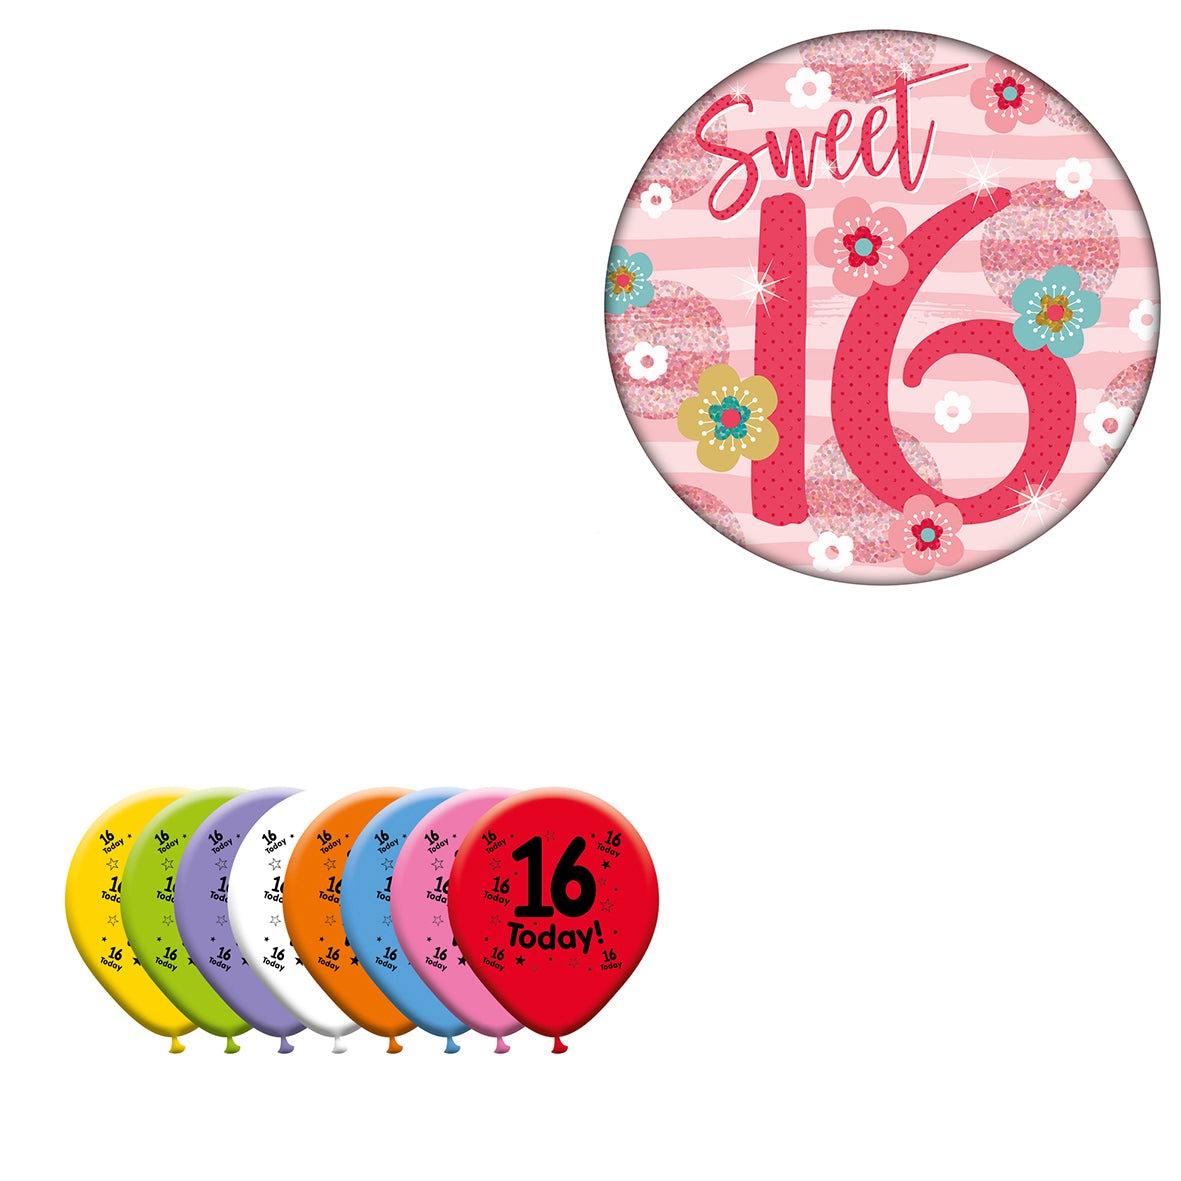 Various Designs Bundle C Balloon, Badge Ages 1 to 80